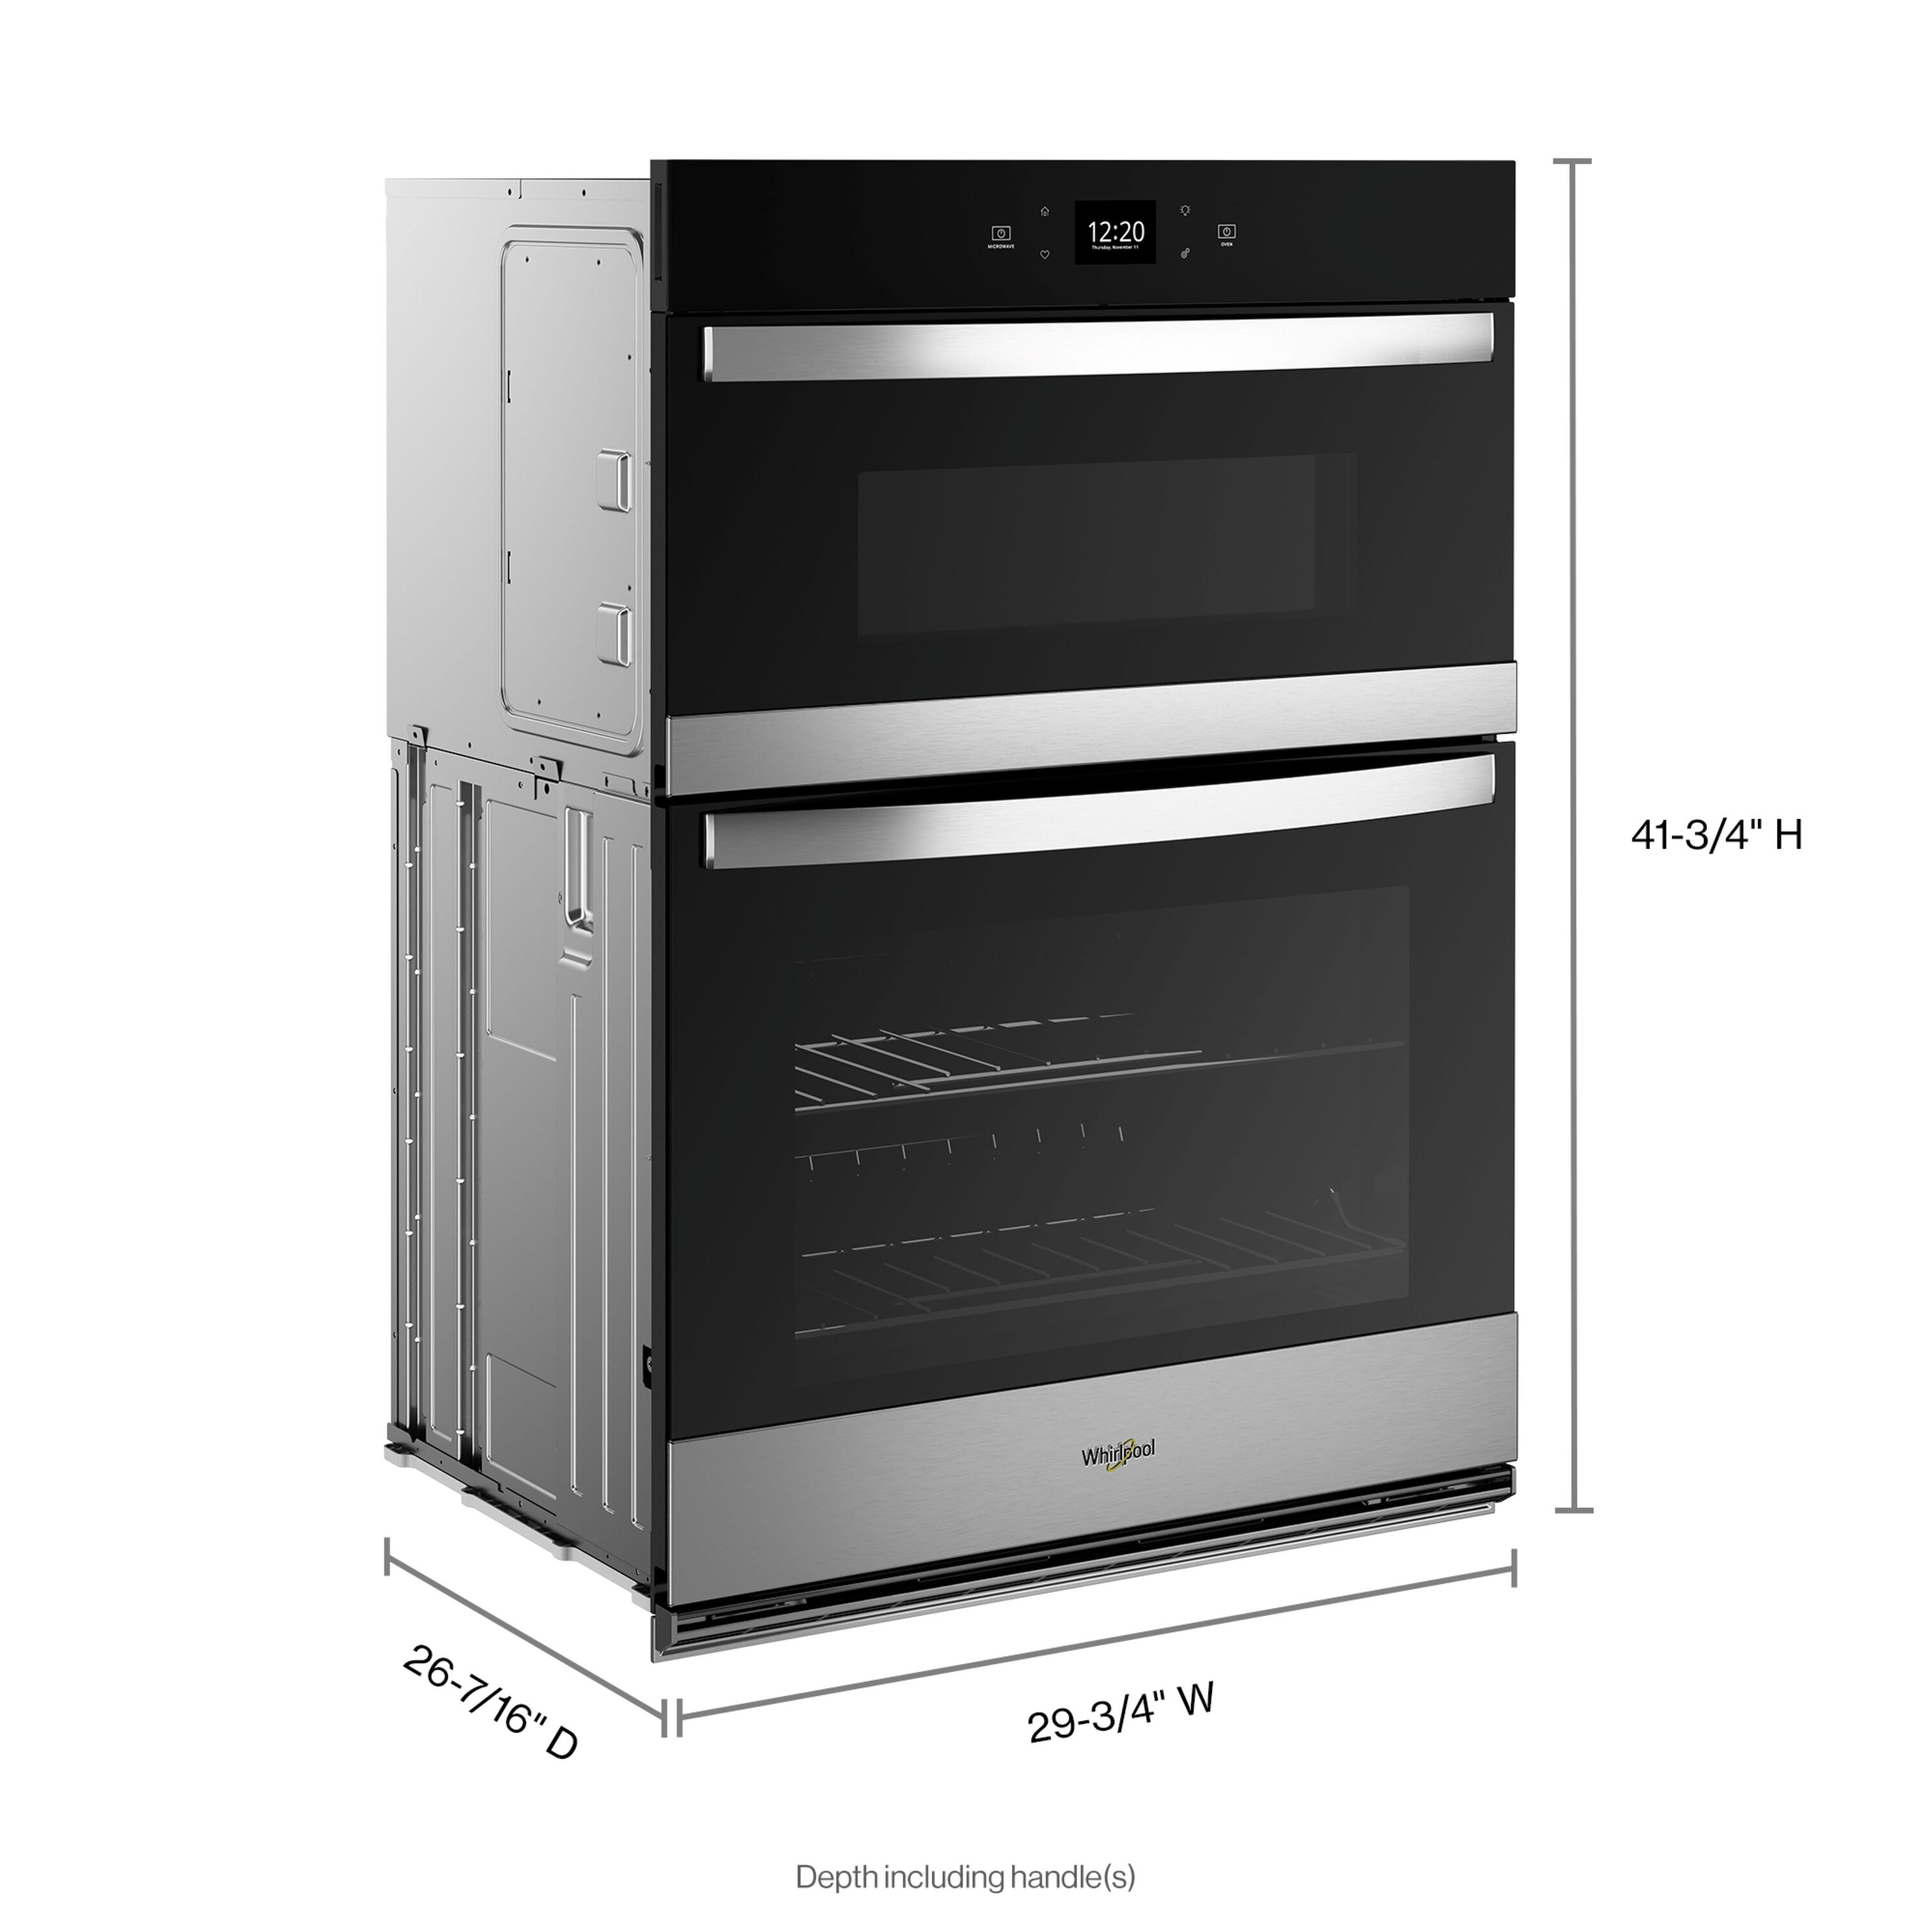 Whirlpool Recalls Microwaves Due To Fire Hazard - Microwaves Are